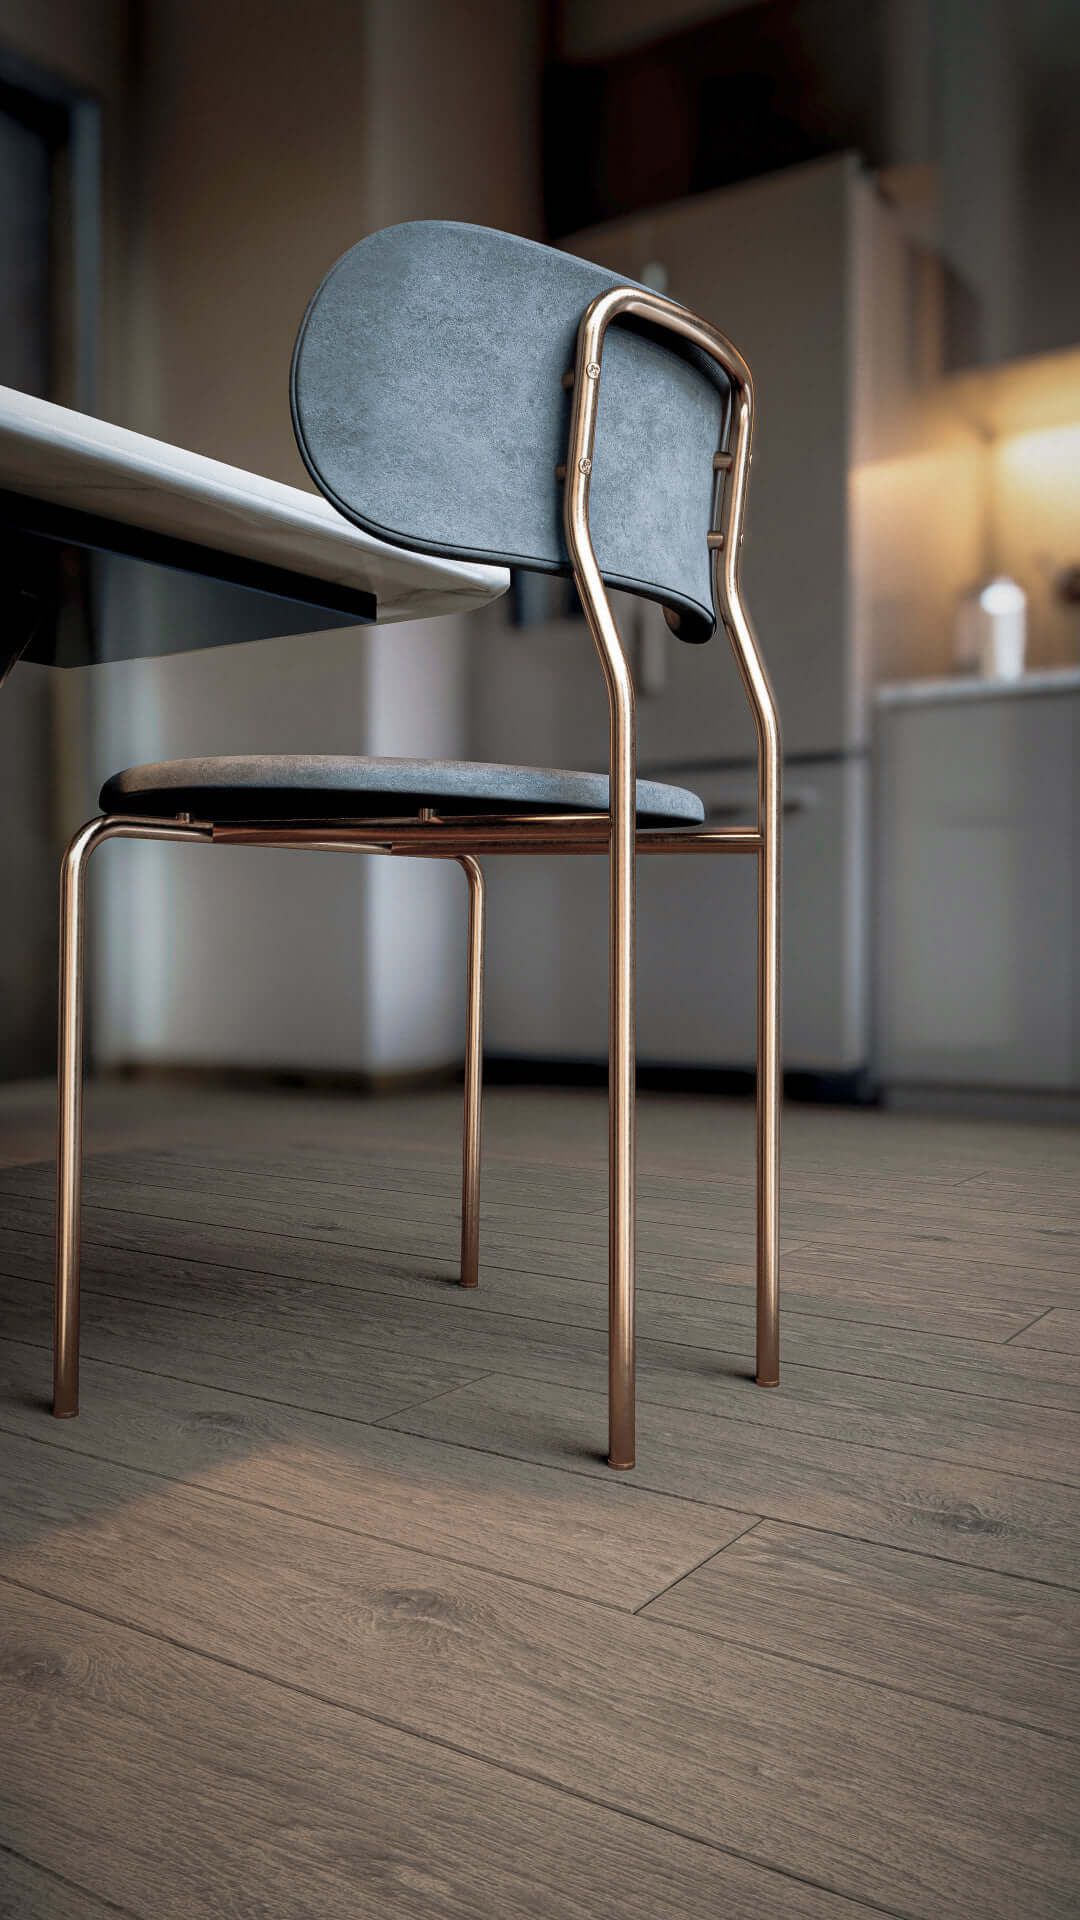 Chair on wooden floor, rendered in Lumion 11 by 3D Fernandes.